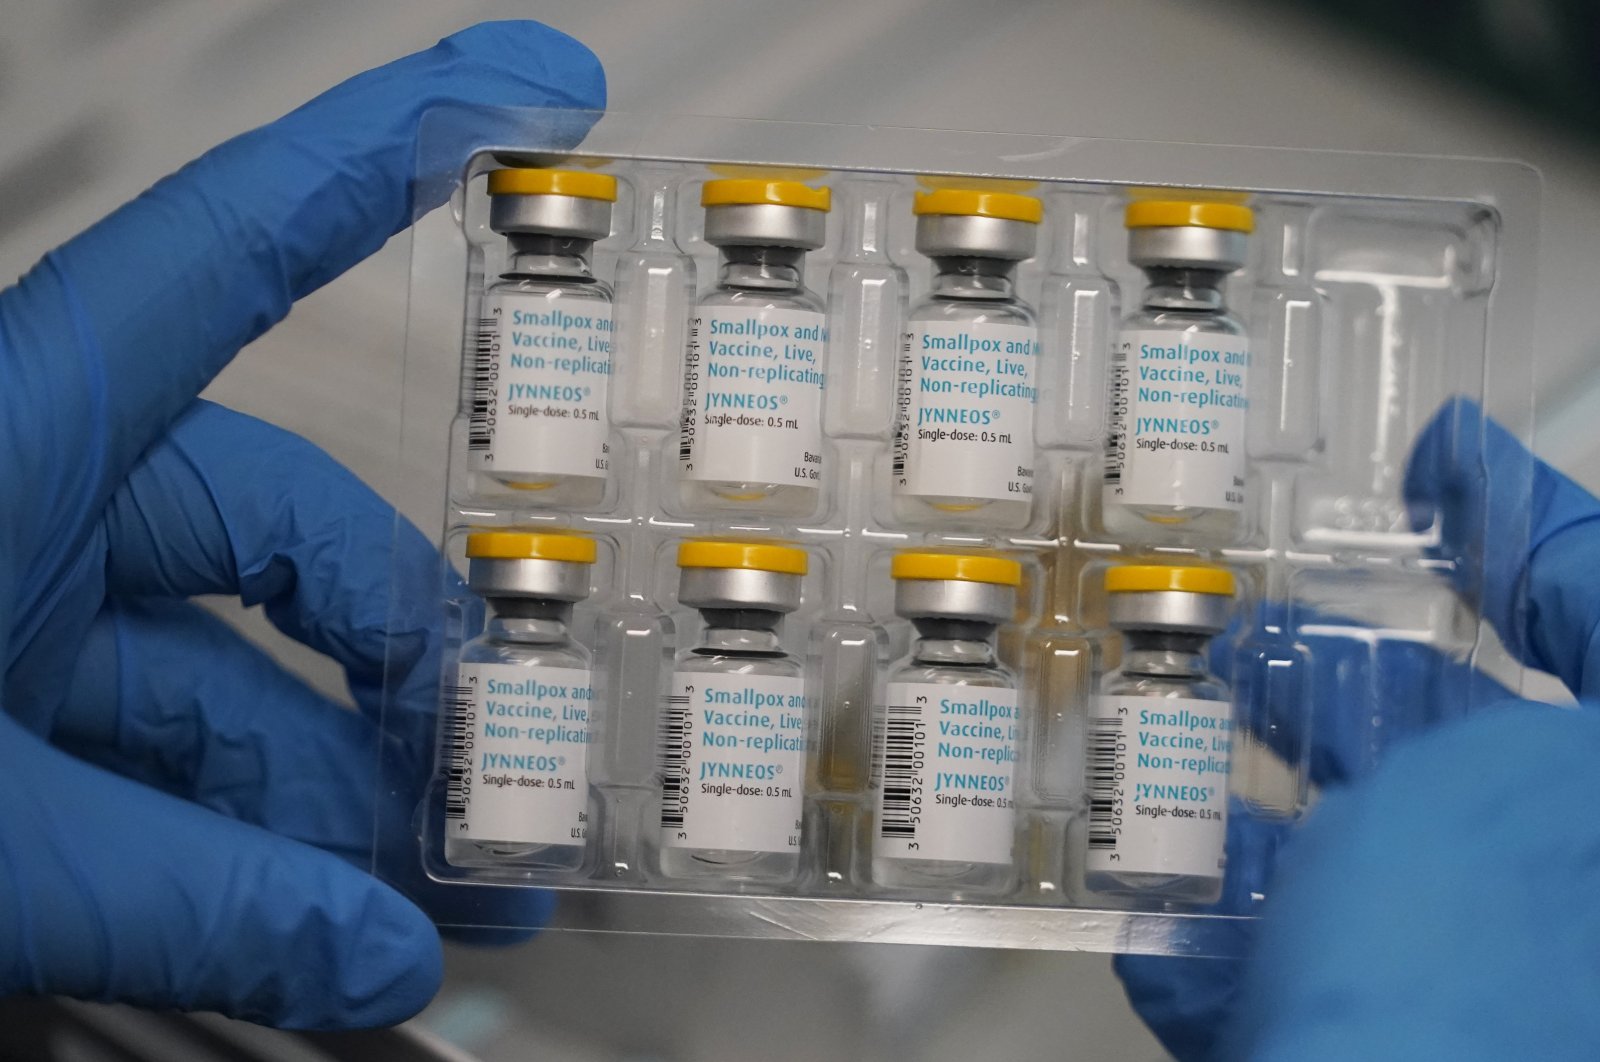 Monkeypox vaccines are shown at the Salt Lake County Health Department, in Salt Lake City, U.S., July 28, 2022. (AP Photo)